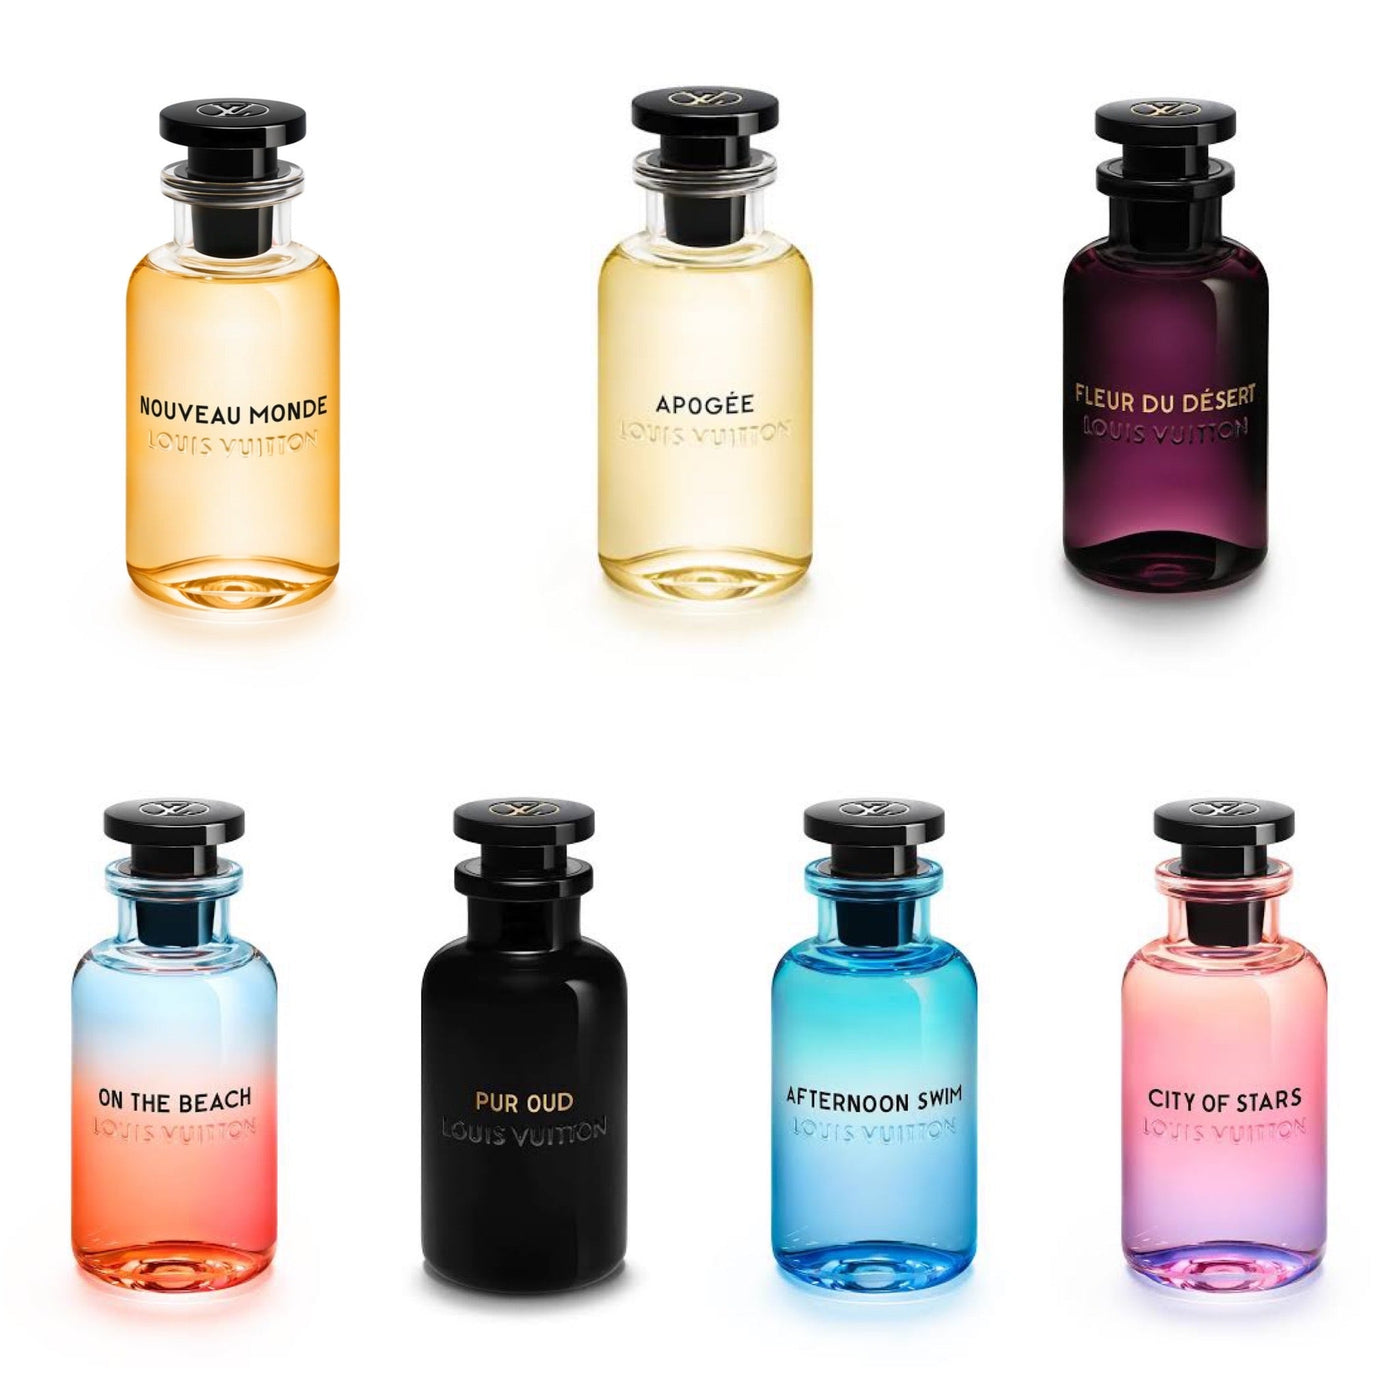 Top 7 Best Louis Vuitton Must Have Perfumes – Discovery Sets